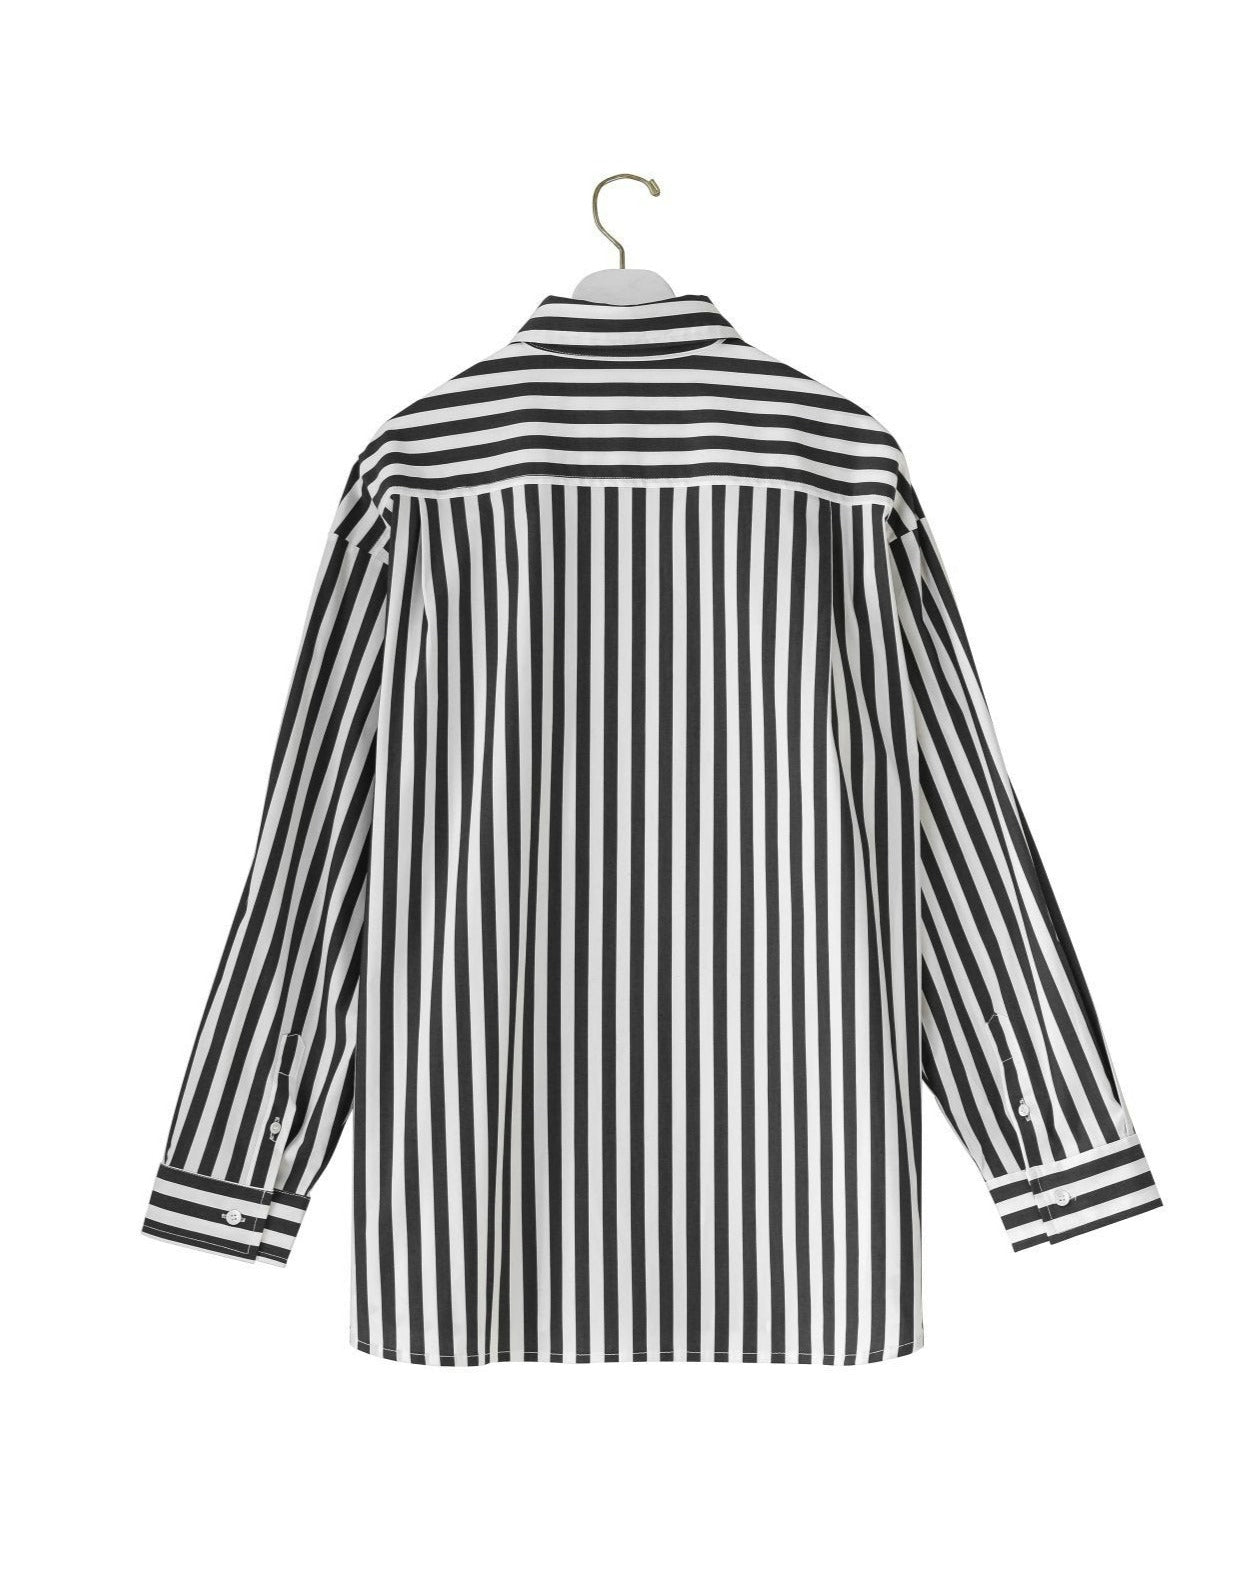 [PAPERMOON] SS / Striped Pattern Oversized Button Down Shirt